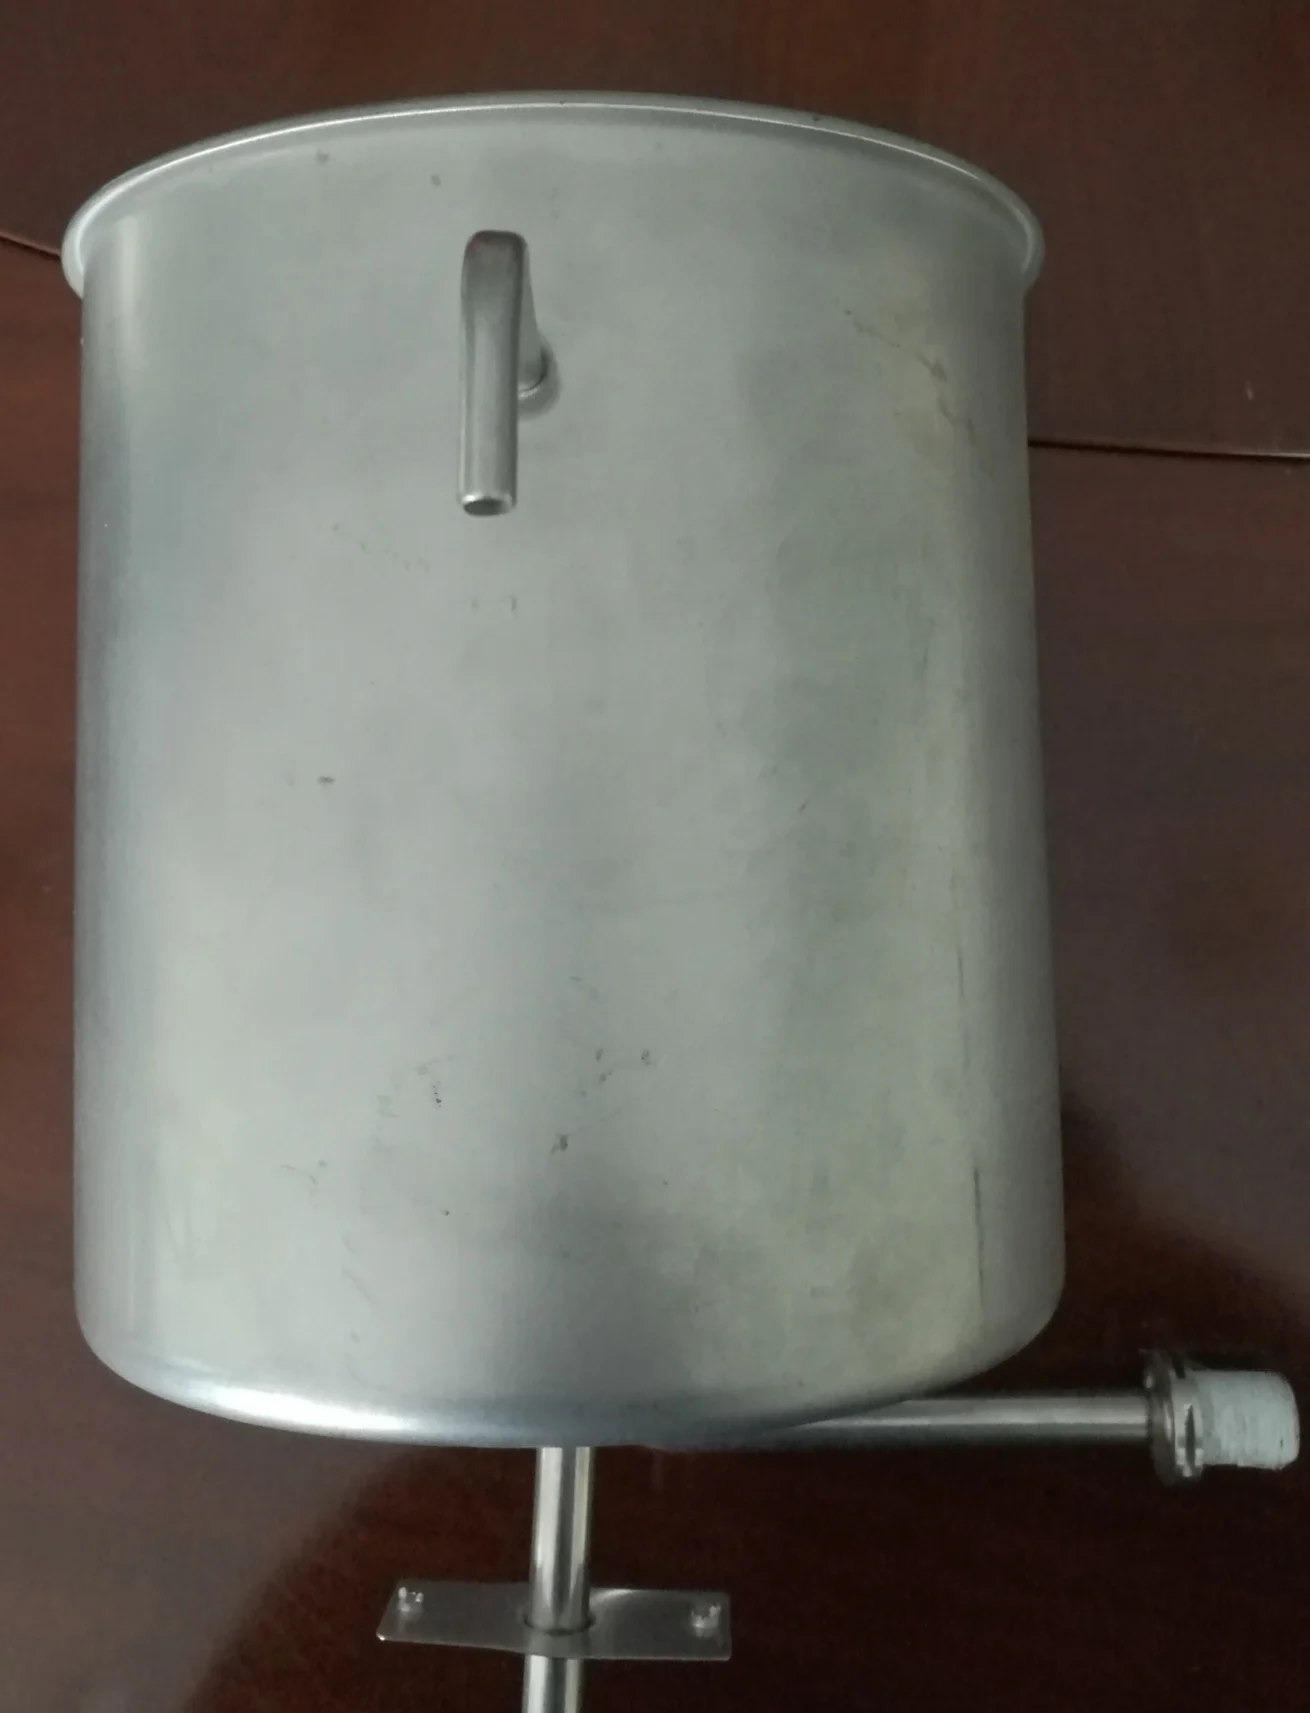 High quality SS304 stainless steel stand water dispenser